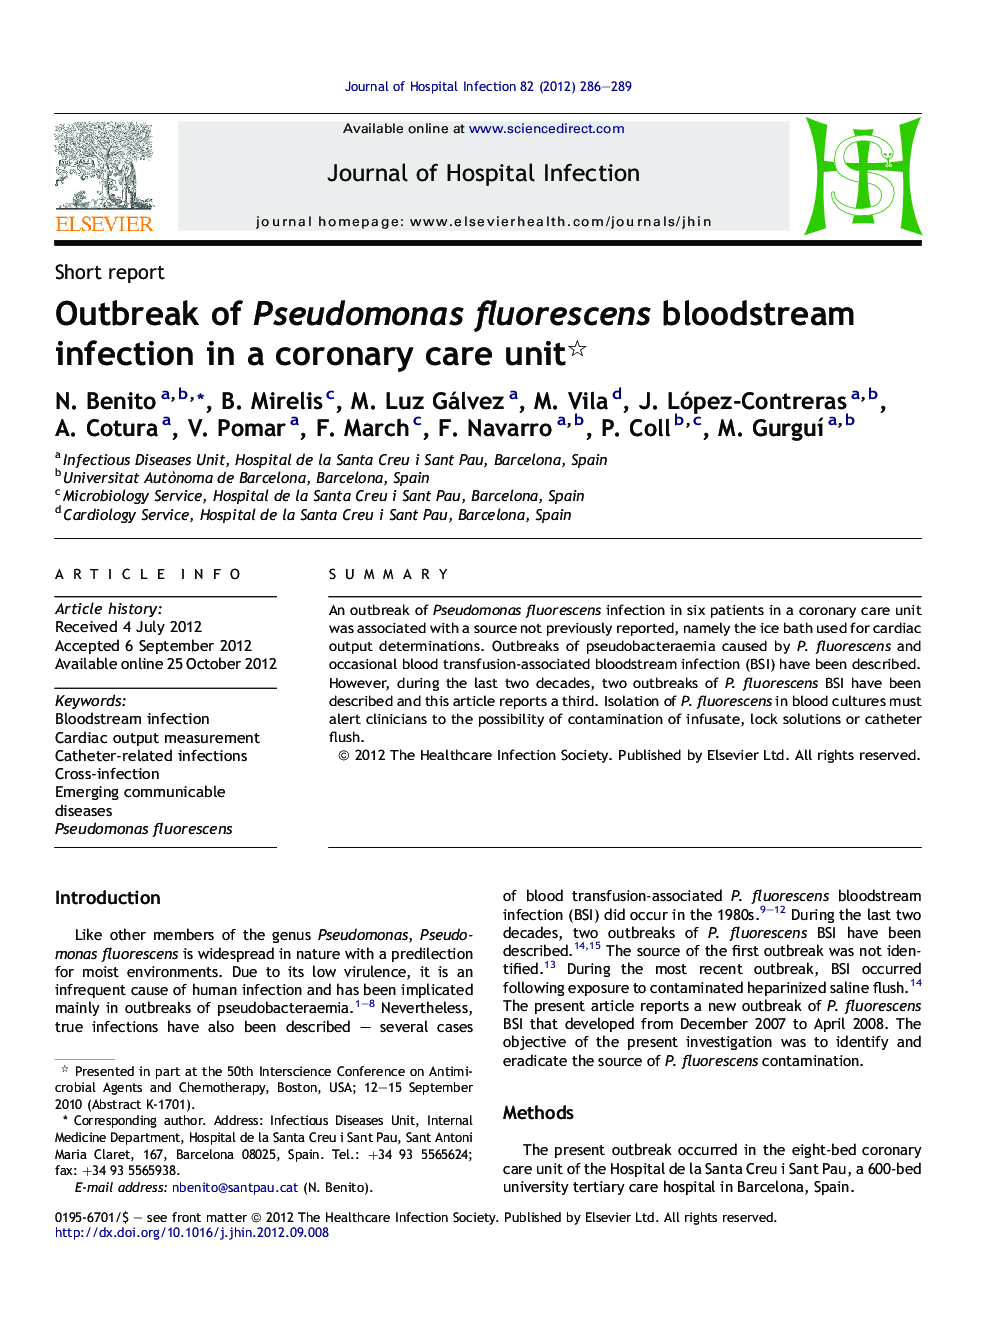 Outbreak of Pseudomonas fluorescens bloodstream infection in a coronary care unit 